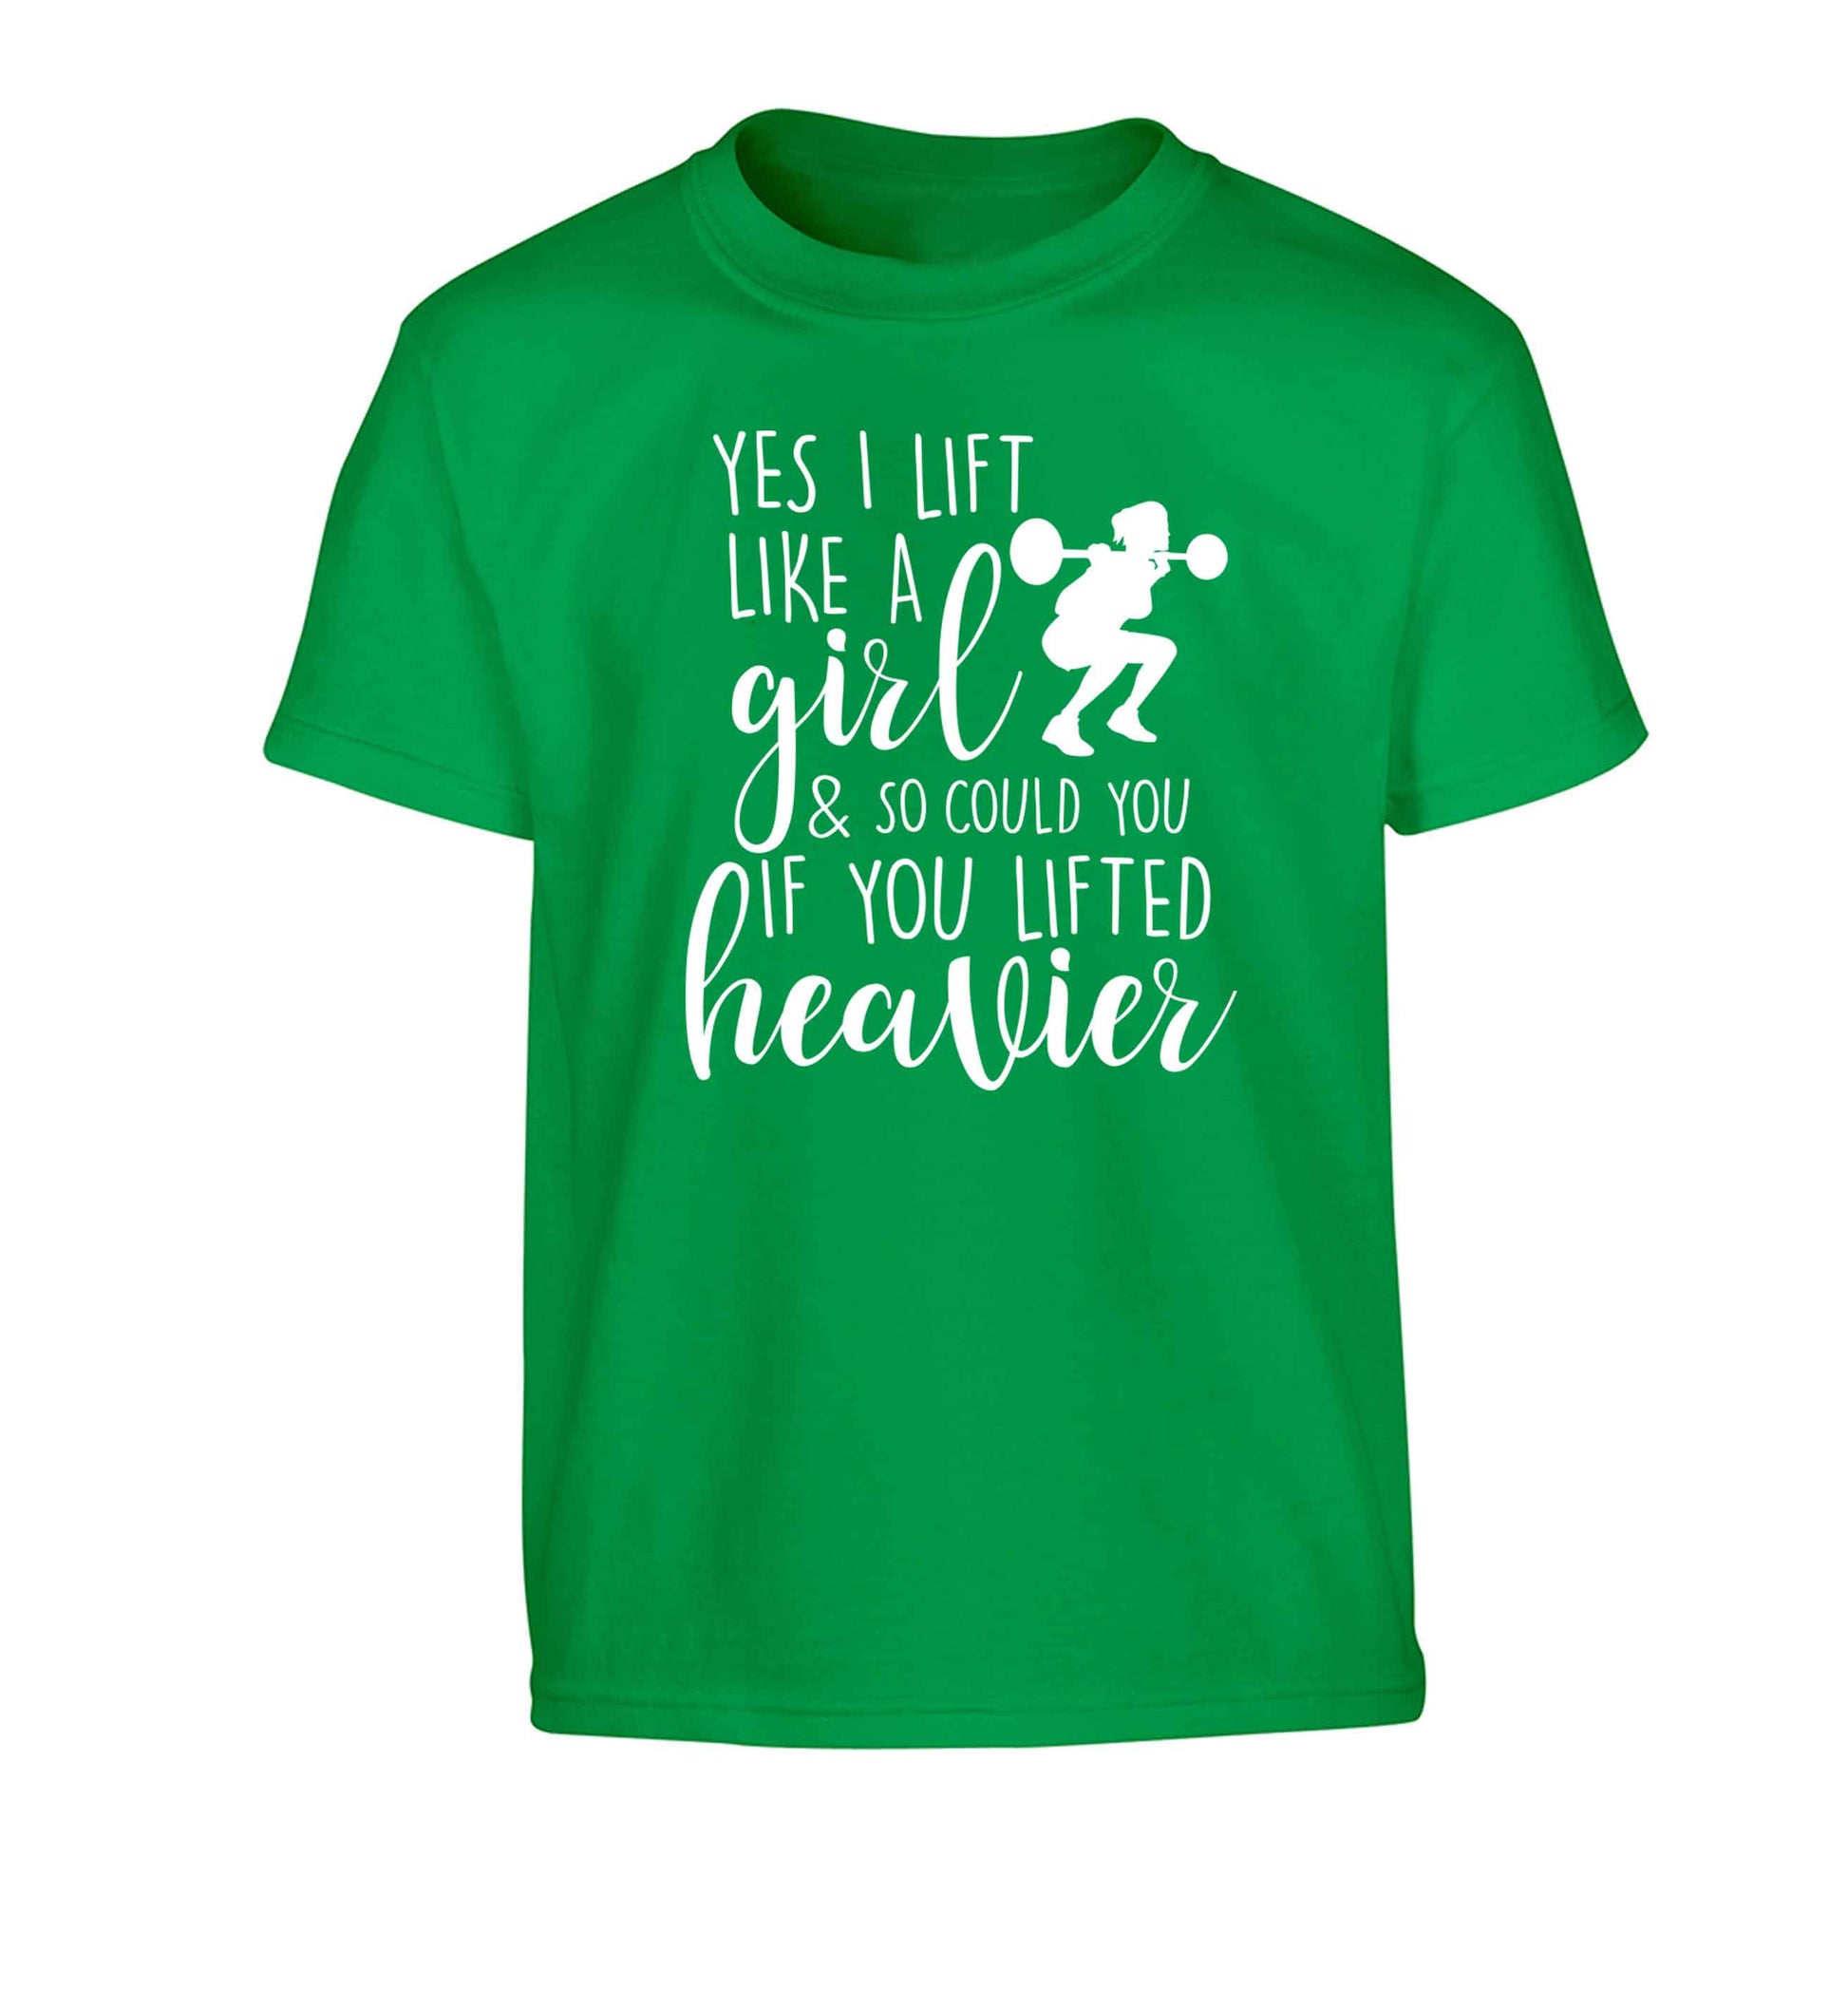 Yes I lift like a girl and so could you if you lifted heavier Children's green Tshirt 12-13 Years